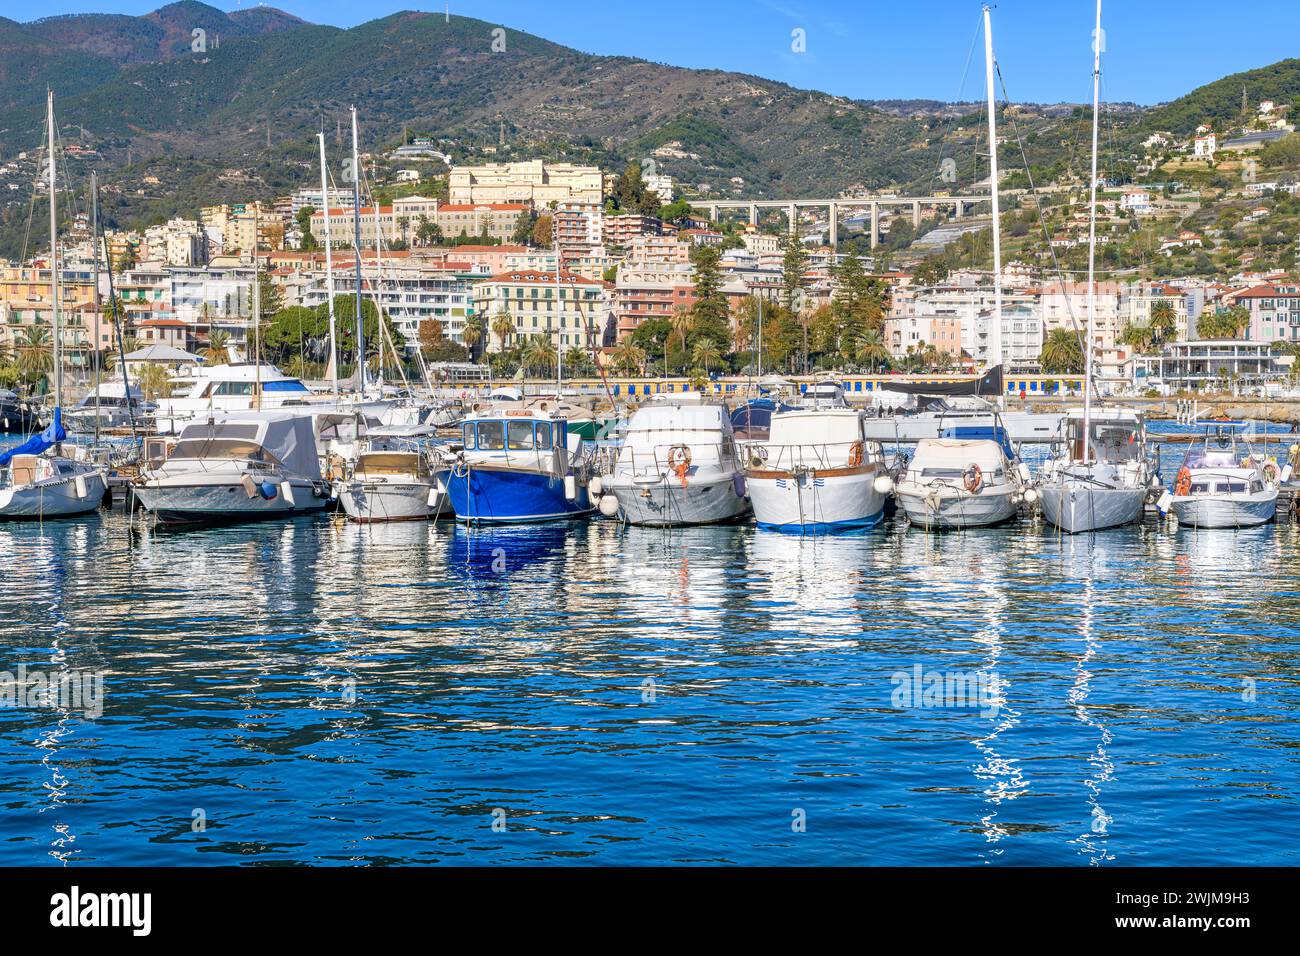 Sanremo town on the Italian Riviera - Riviera Ligure, with the beautiful marina in the foreground. Shot from the harbour arm called Molo Sud. Stock Photo